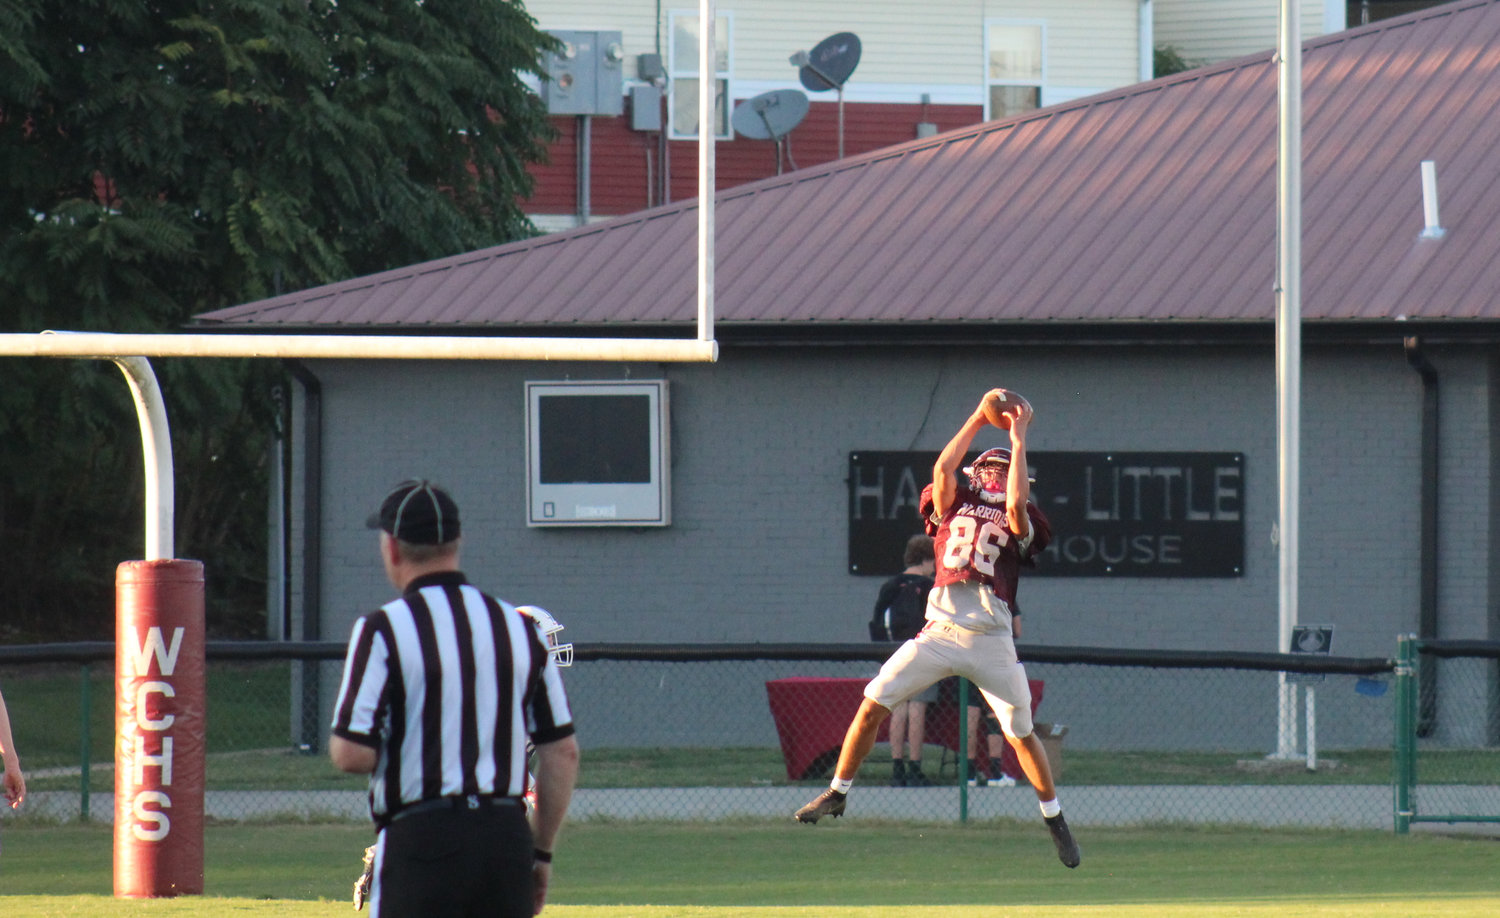 Gage Stephenson with a great interception